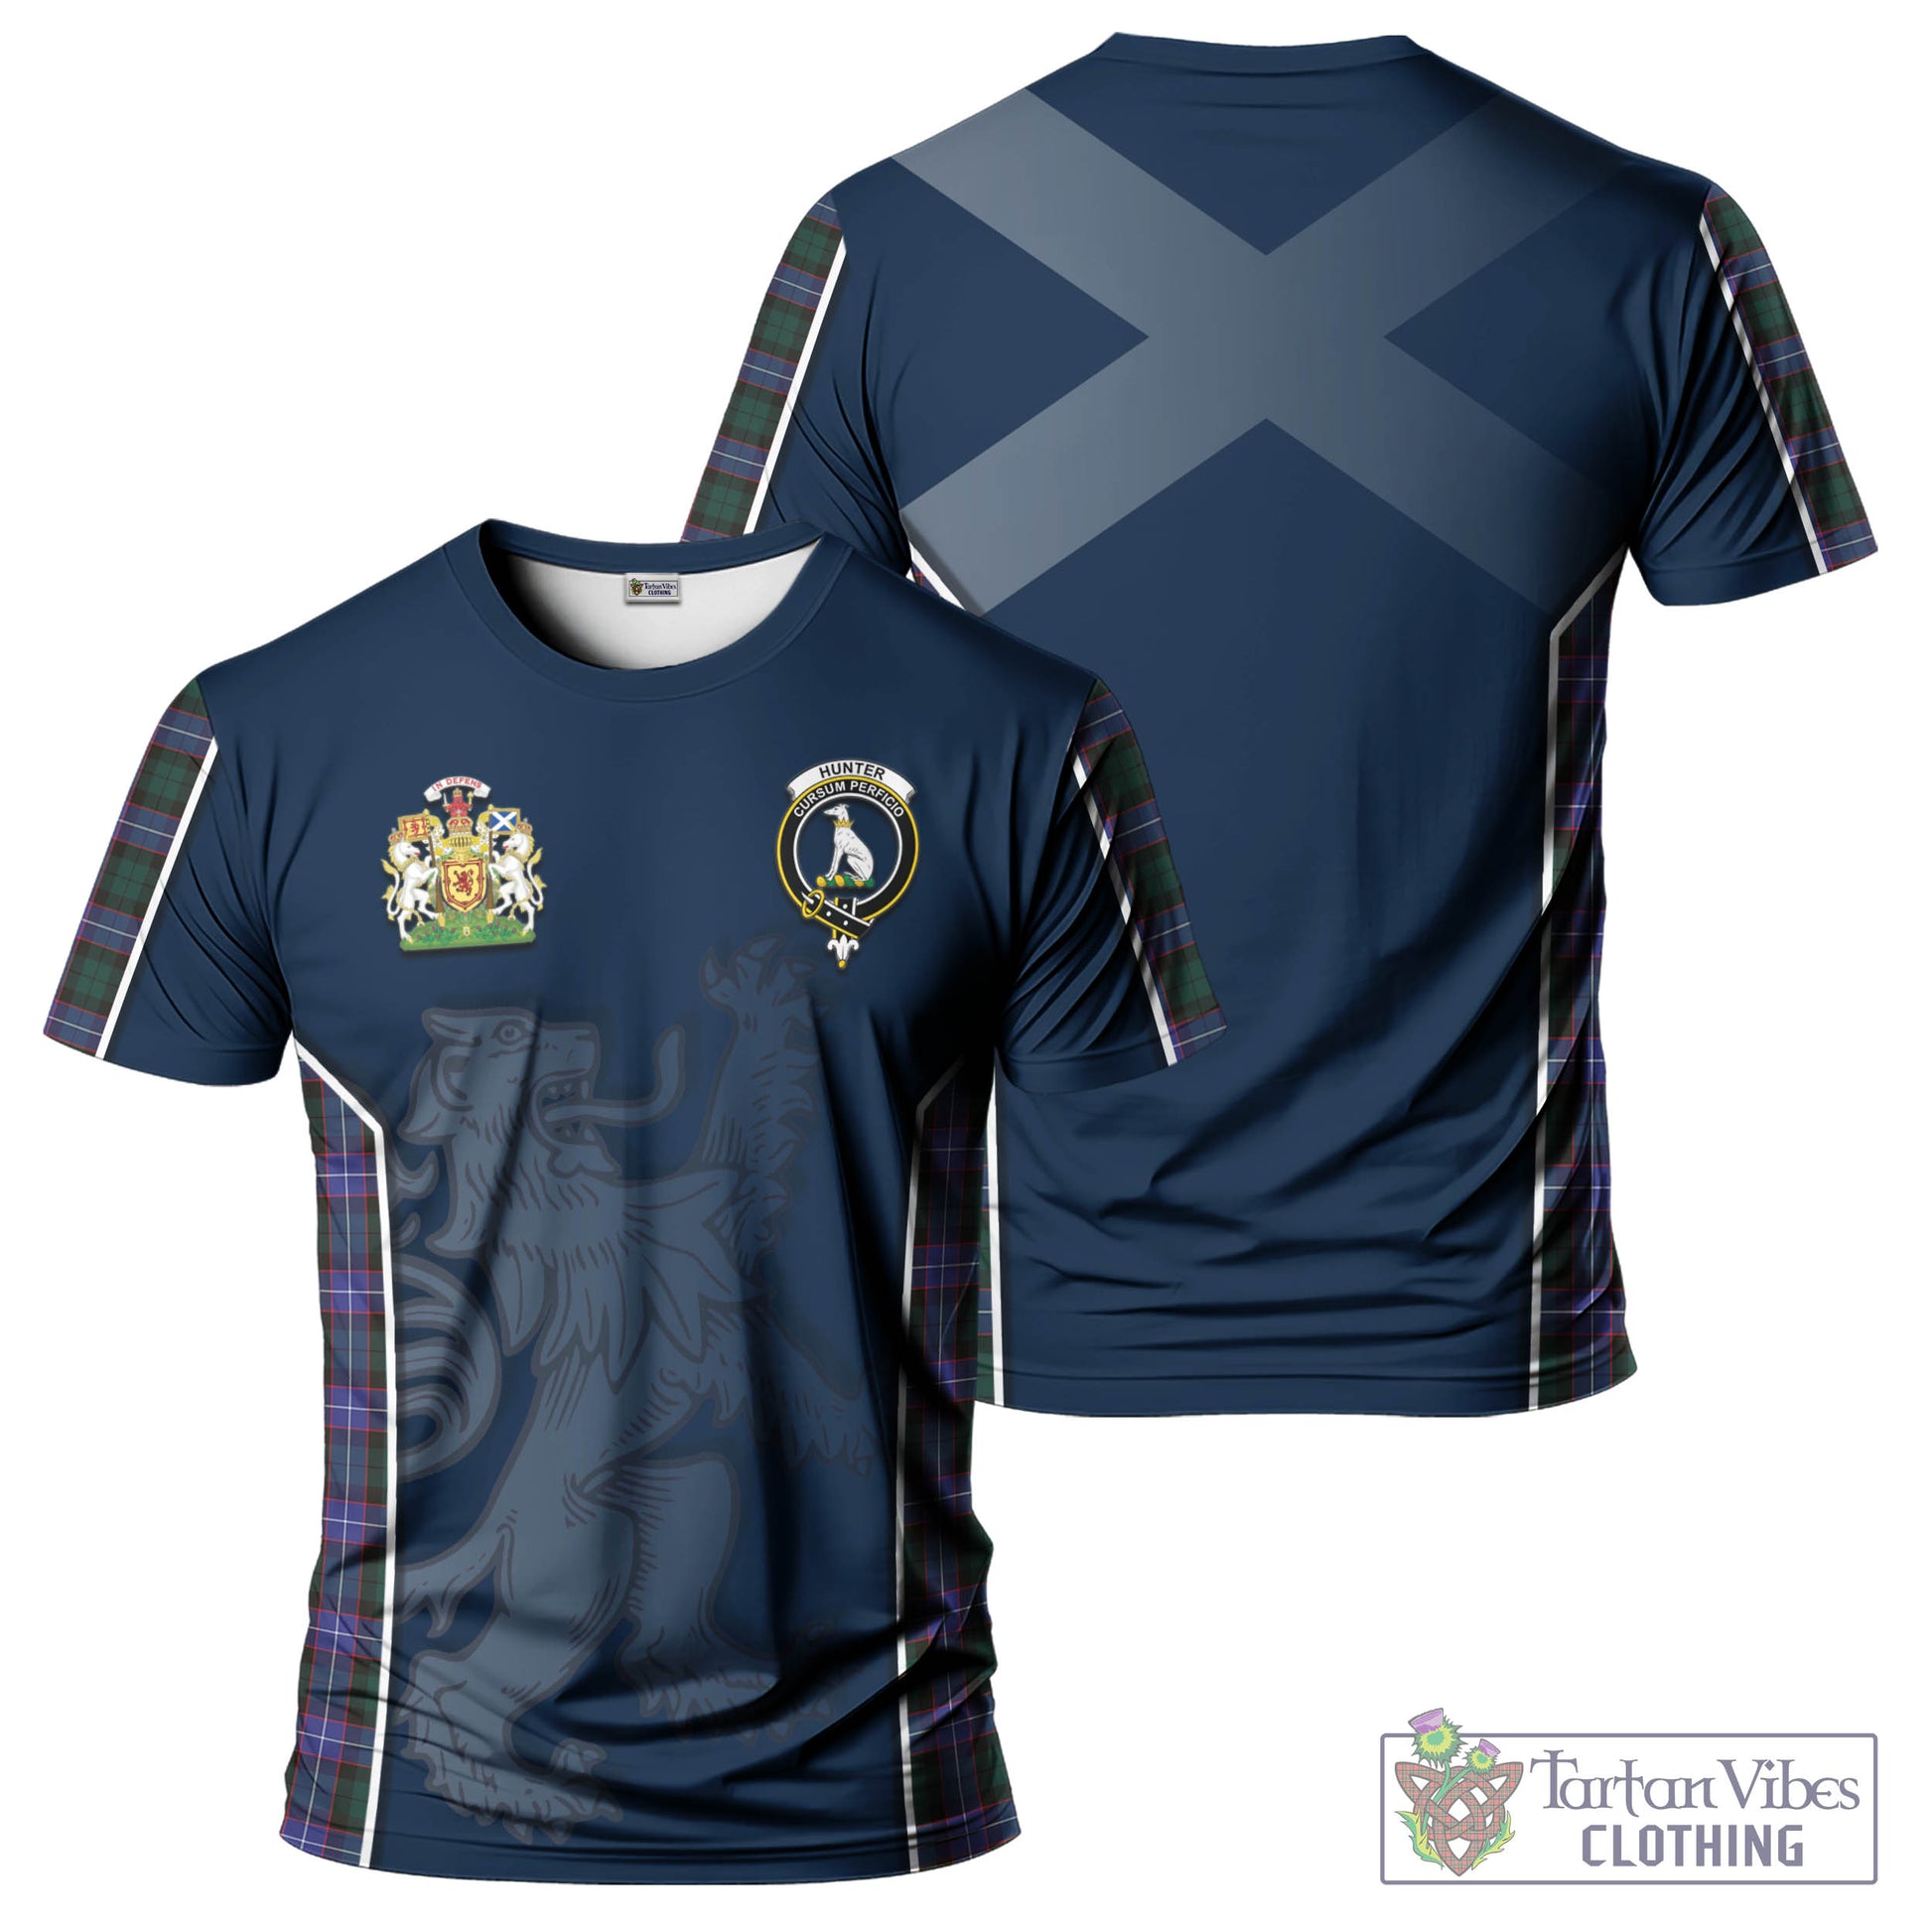 Tartan Vibes Clothing Hunter Modern Tartan T-Shirt with Family Crest and Lion Rampant Vibes Sport Style